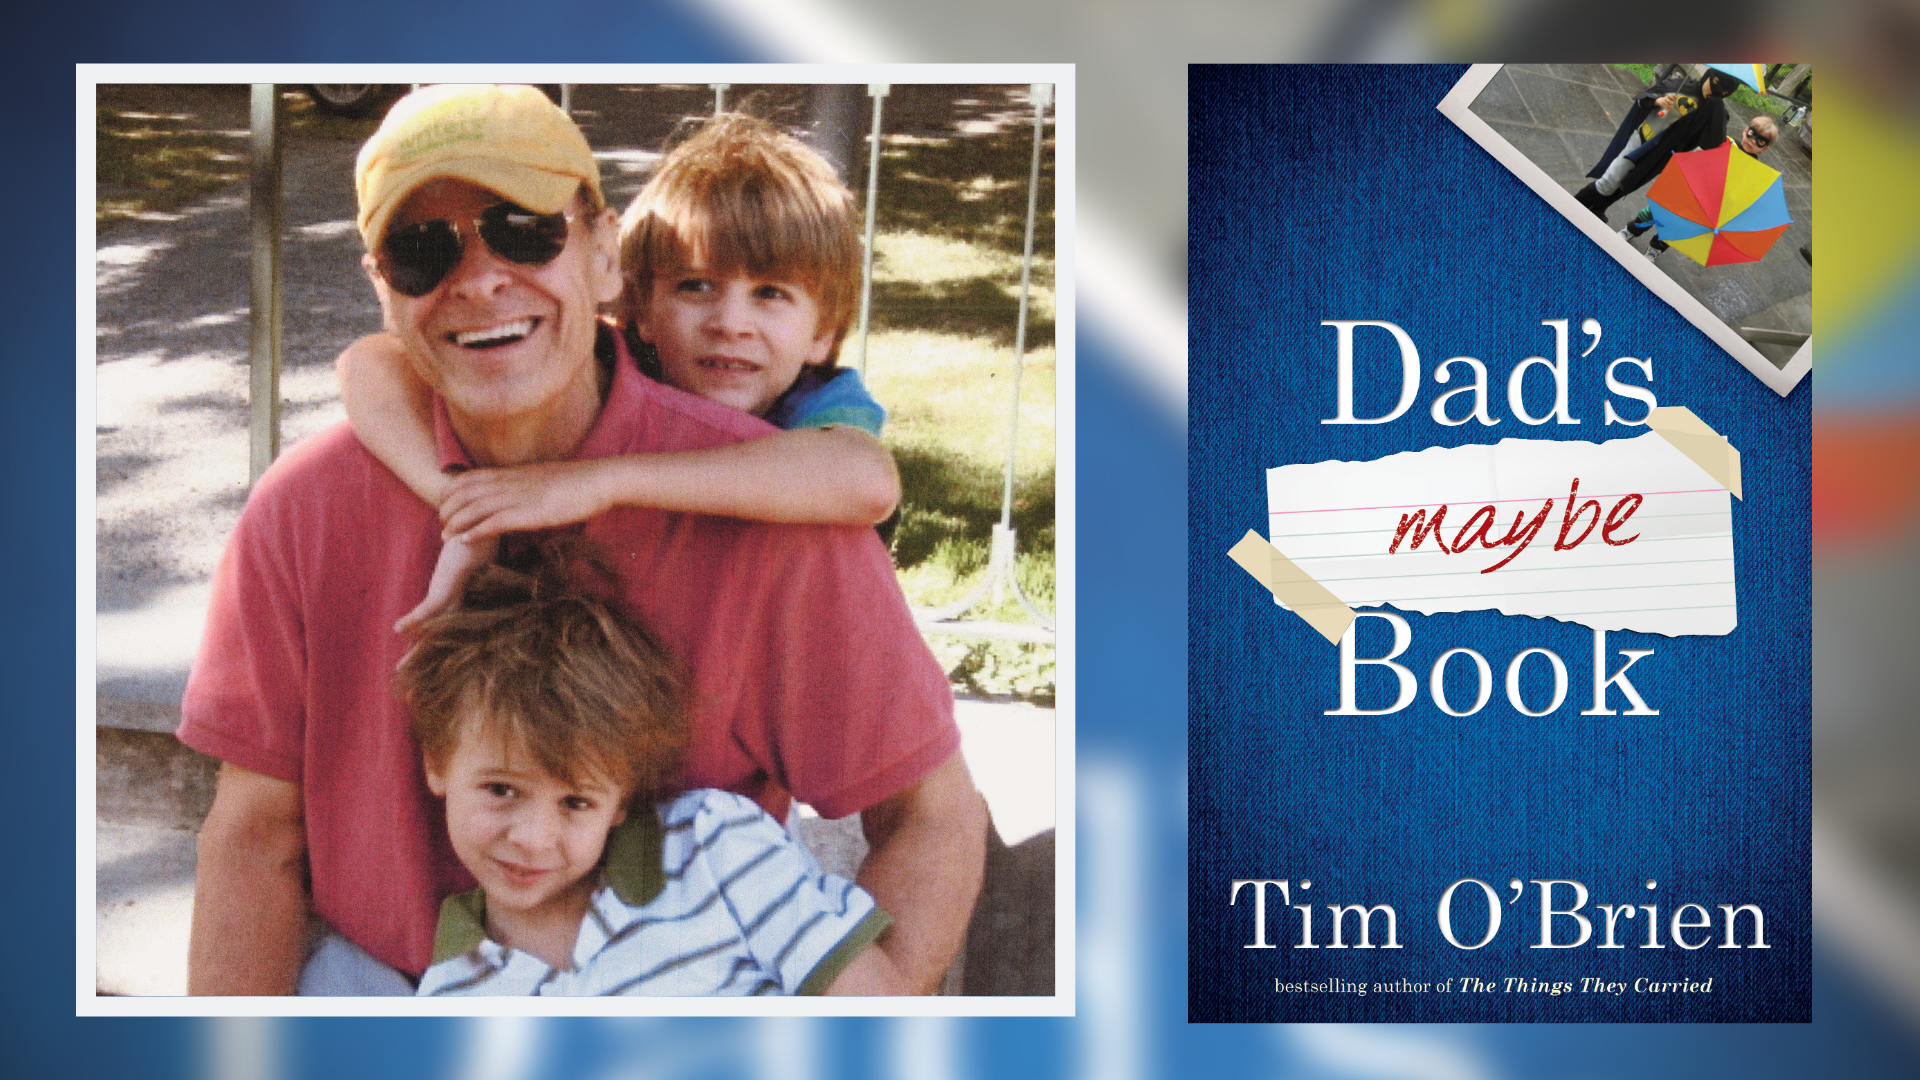 The "Dad's Maybe Book" compiles 15 years of advice, memories, and introspection shared via letters to his his sons.